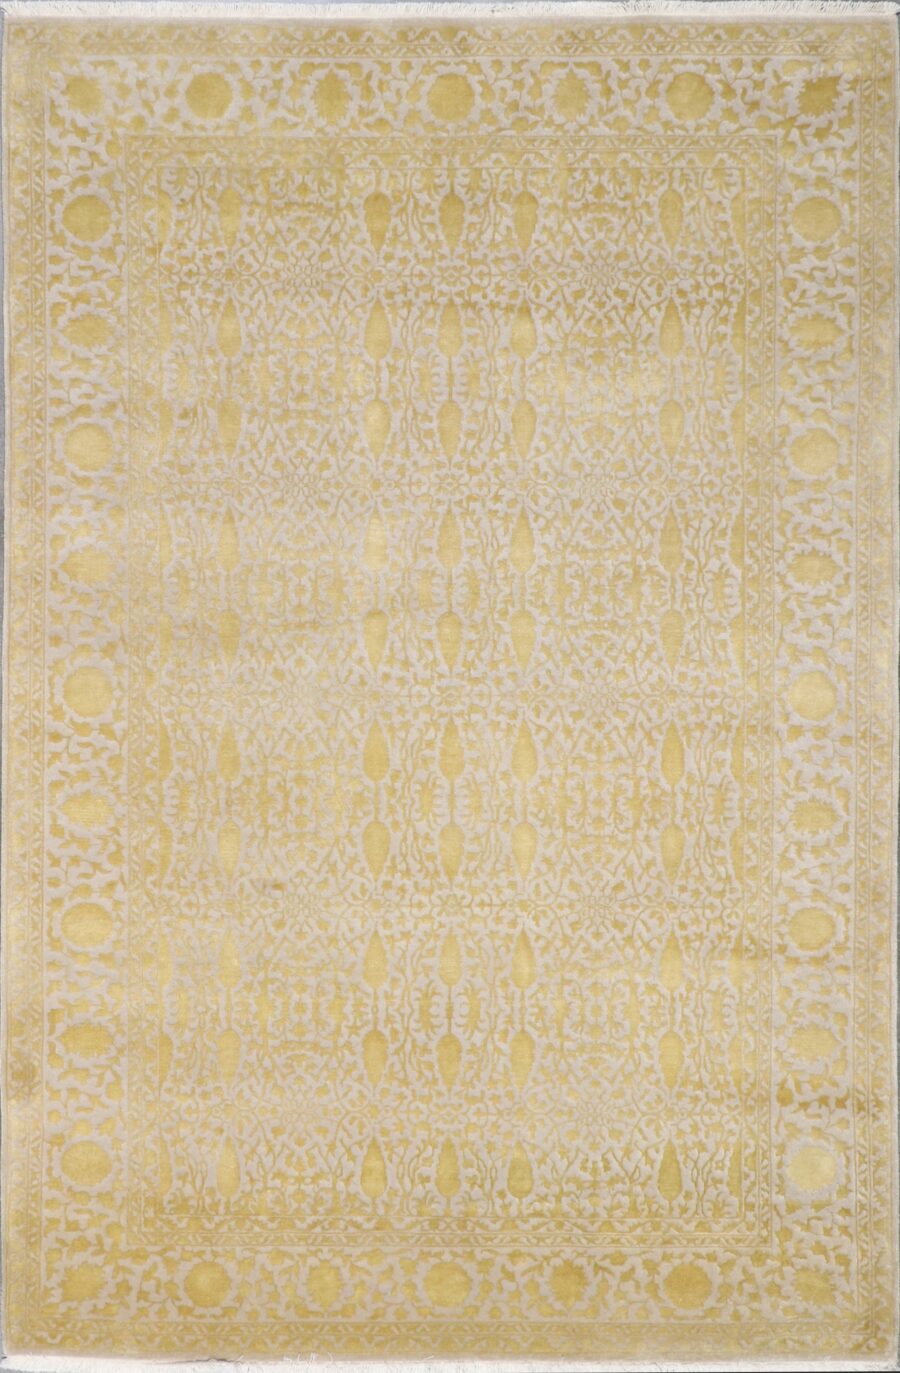 6'1"x9'7" Transitional classic Gold Wool & Silk Hand-Knotted Rug - Direct Rug Import | Rugs in Chicago, Indiana,South Bend,Granger